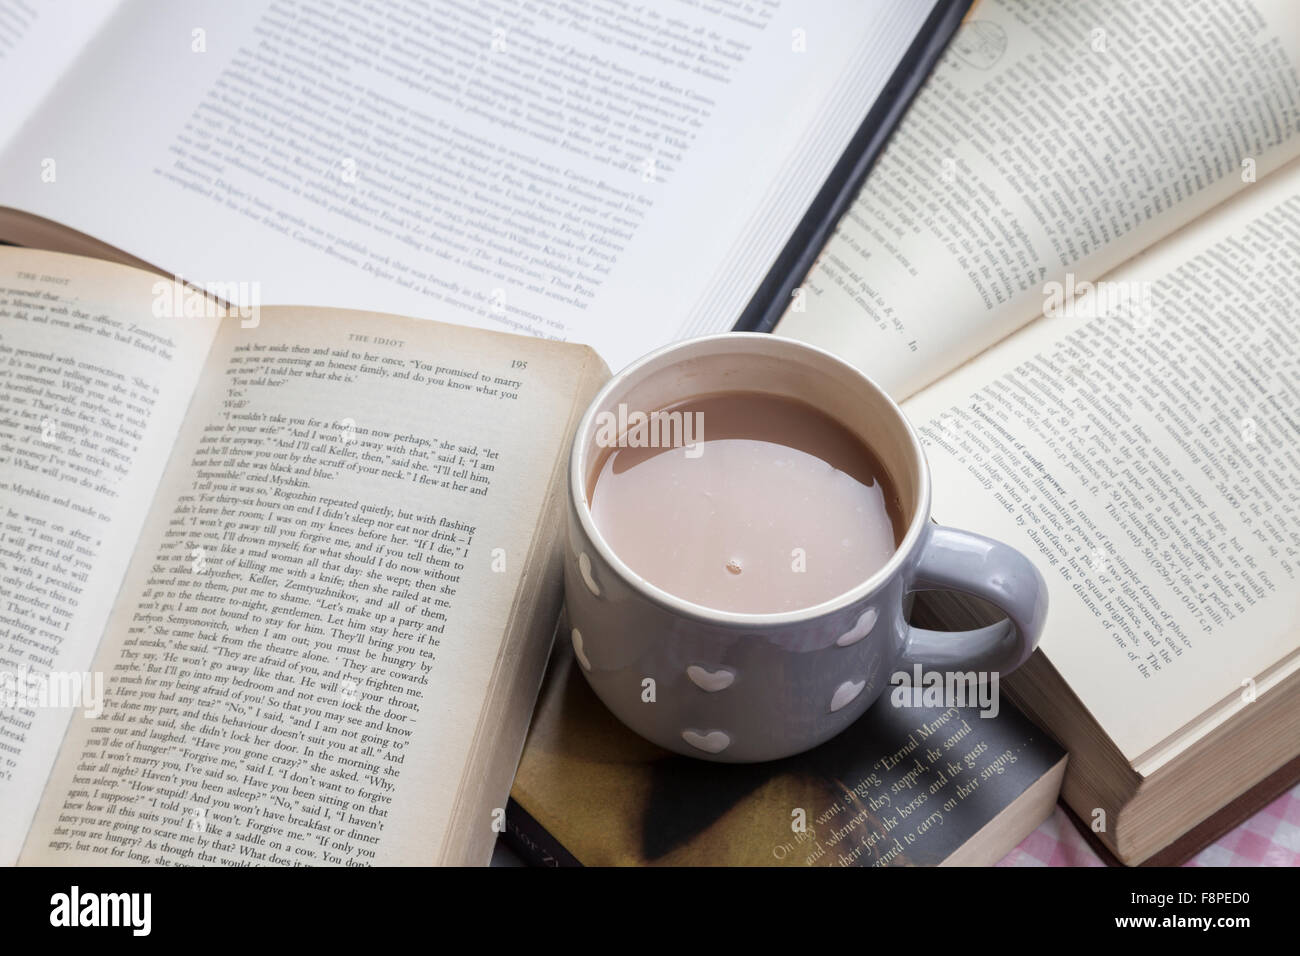 Mug of tea on tabletop covered with books Stock Photo